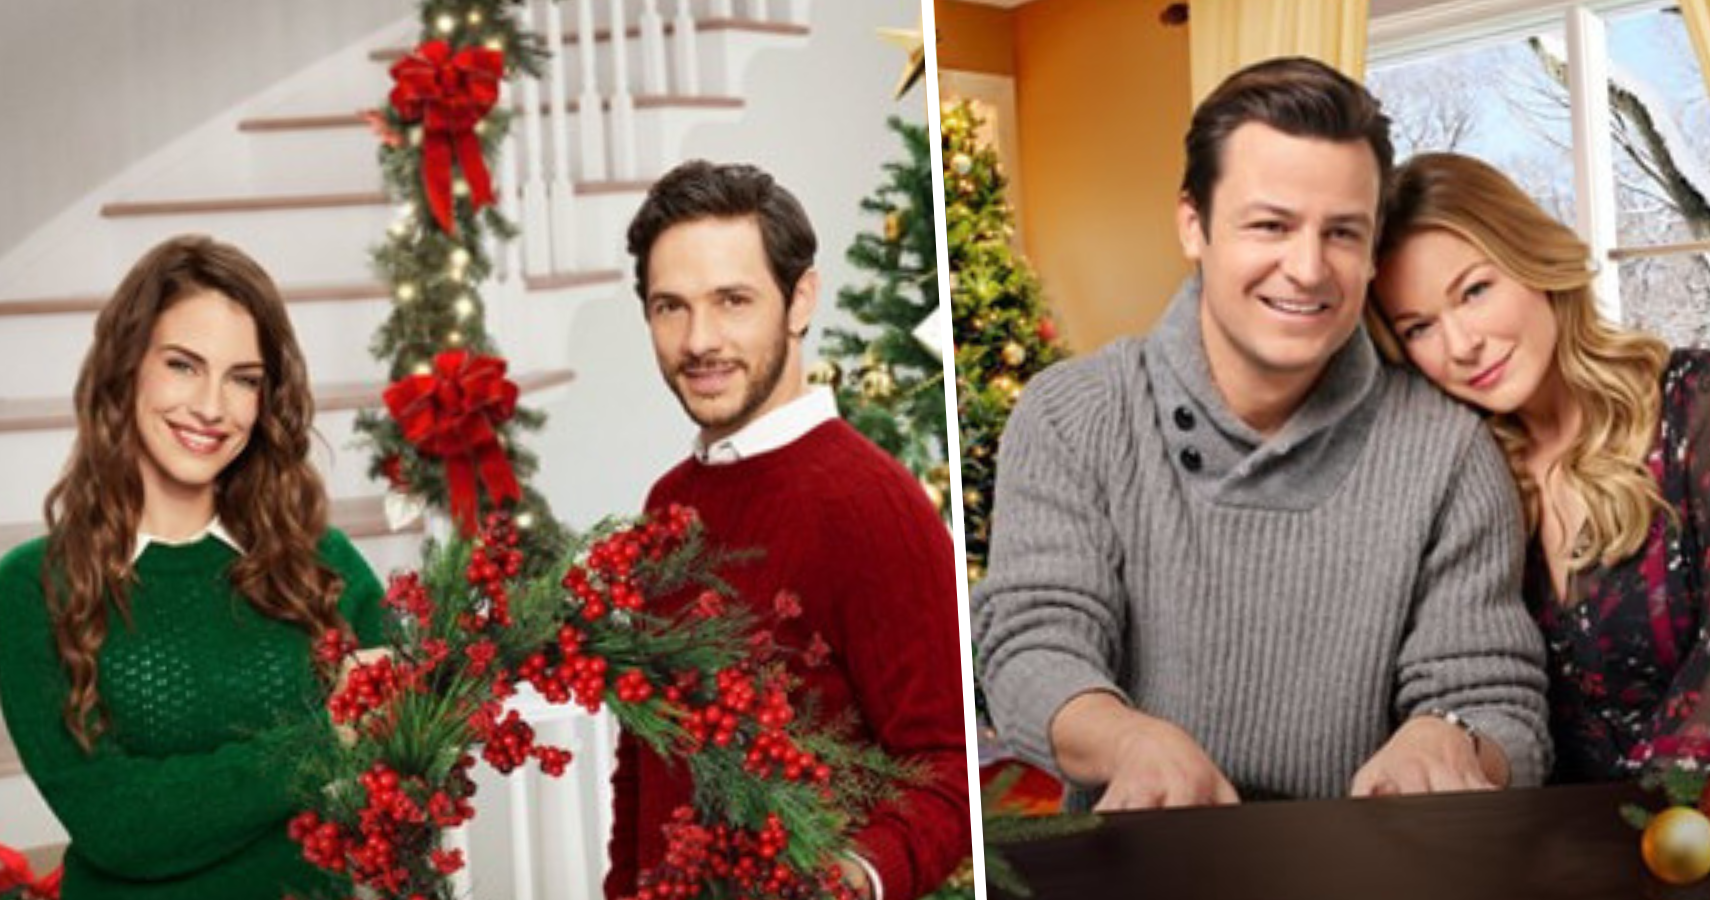 The Hallmark Channel Just Released Their Holiday Movie Lineup